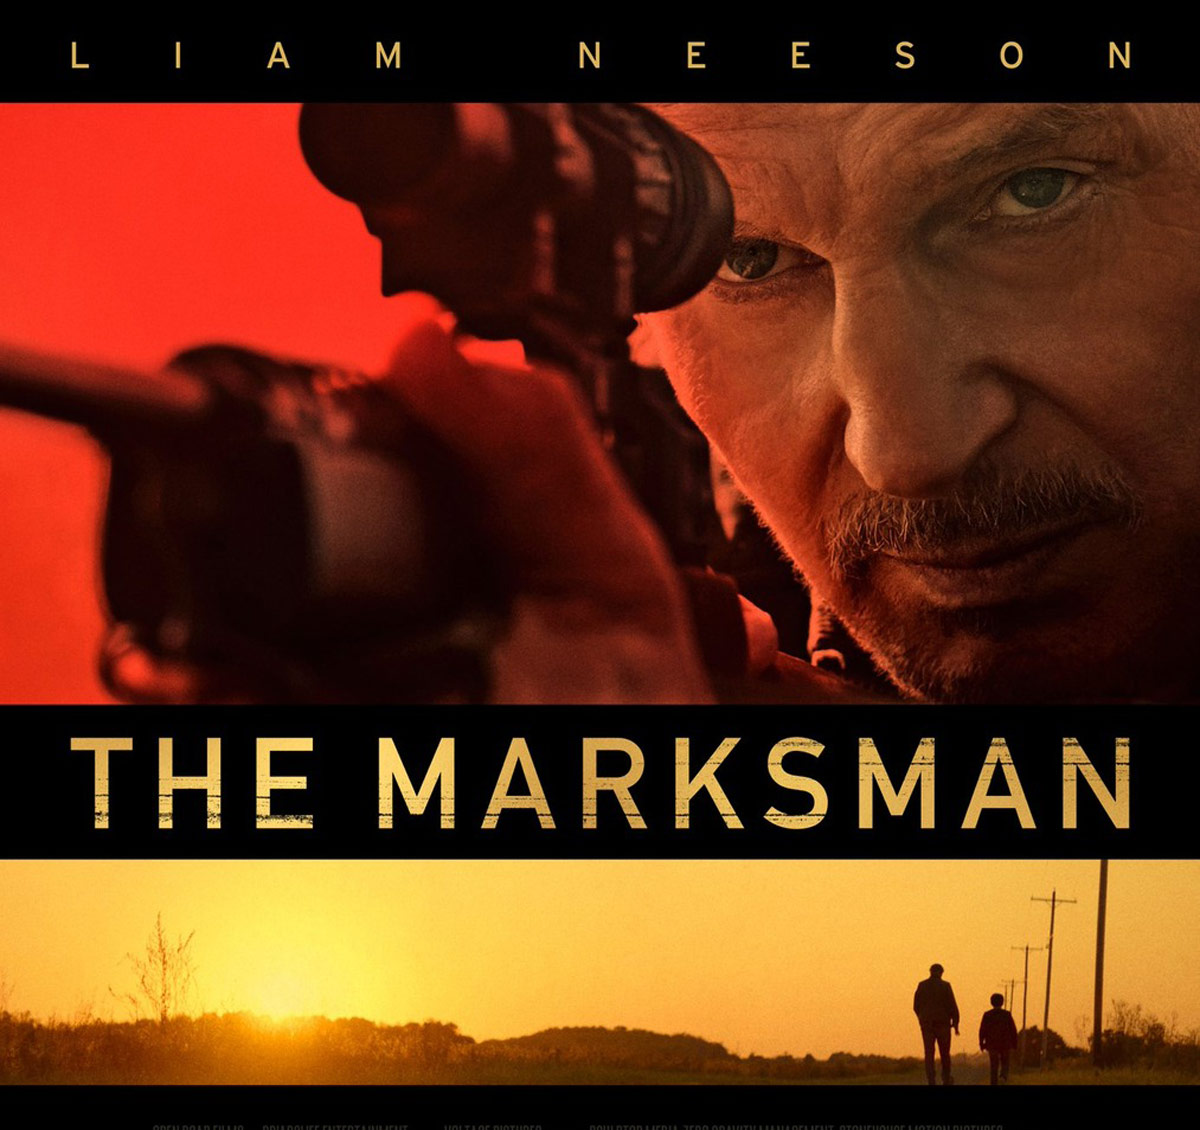 The Marksman starring Liam Neeson tops box office